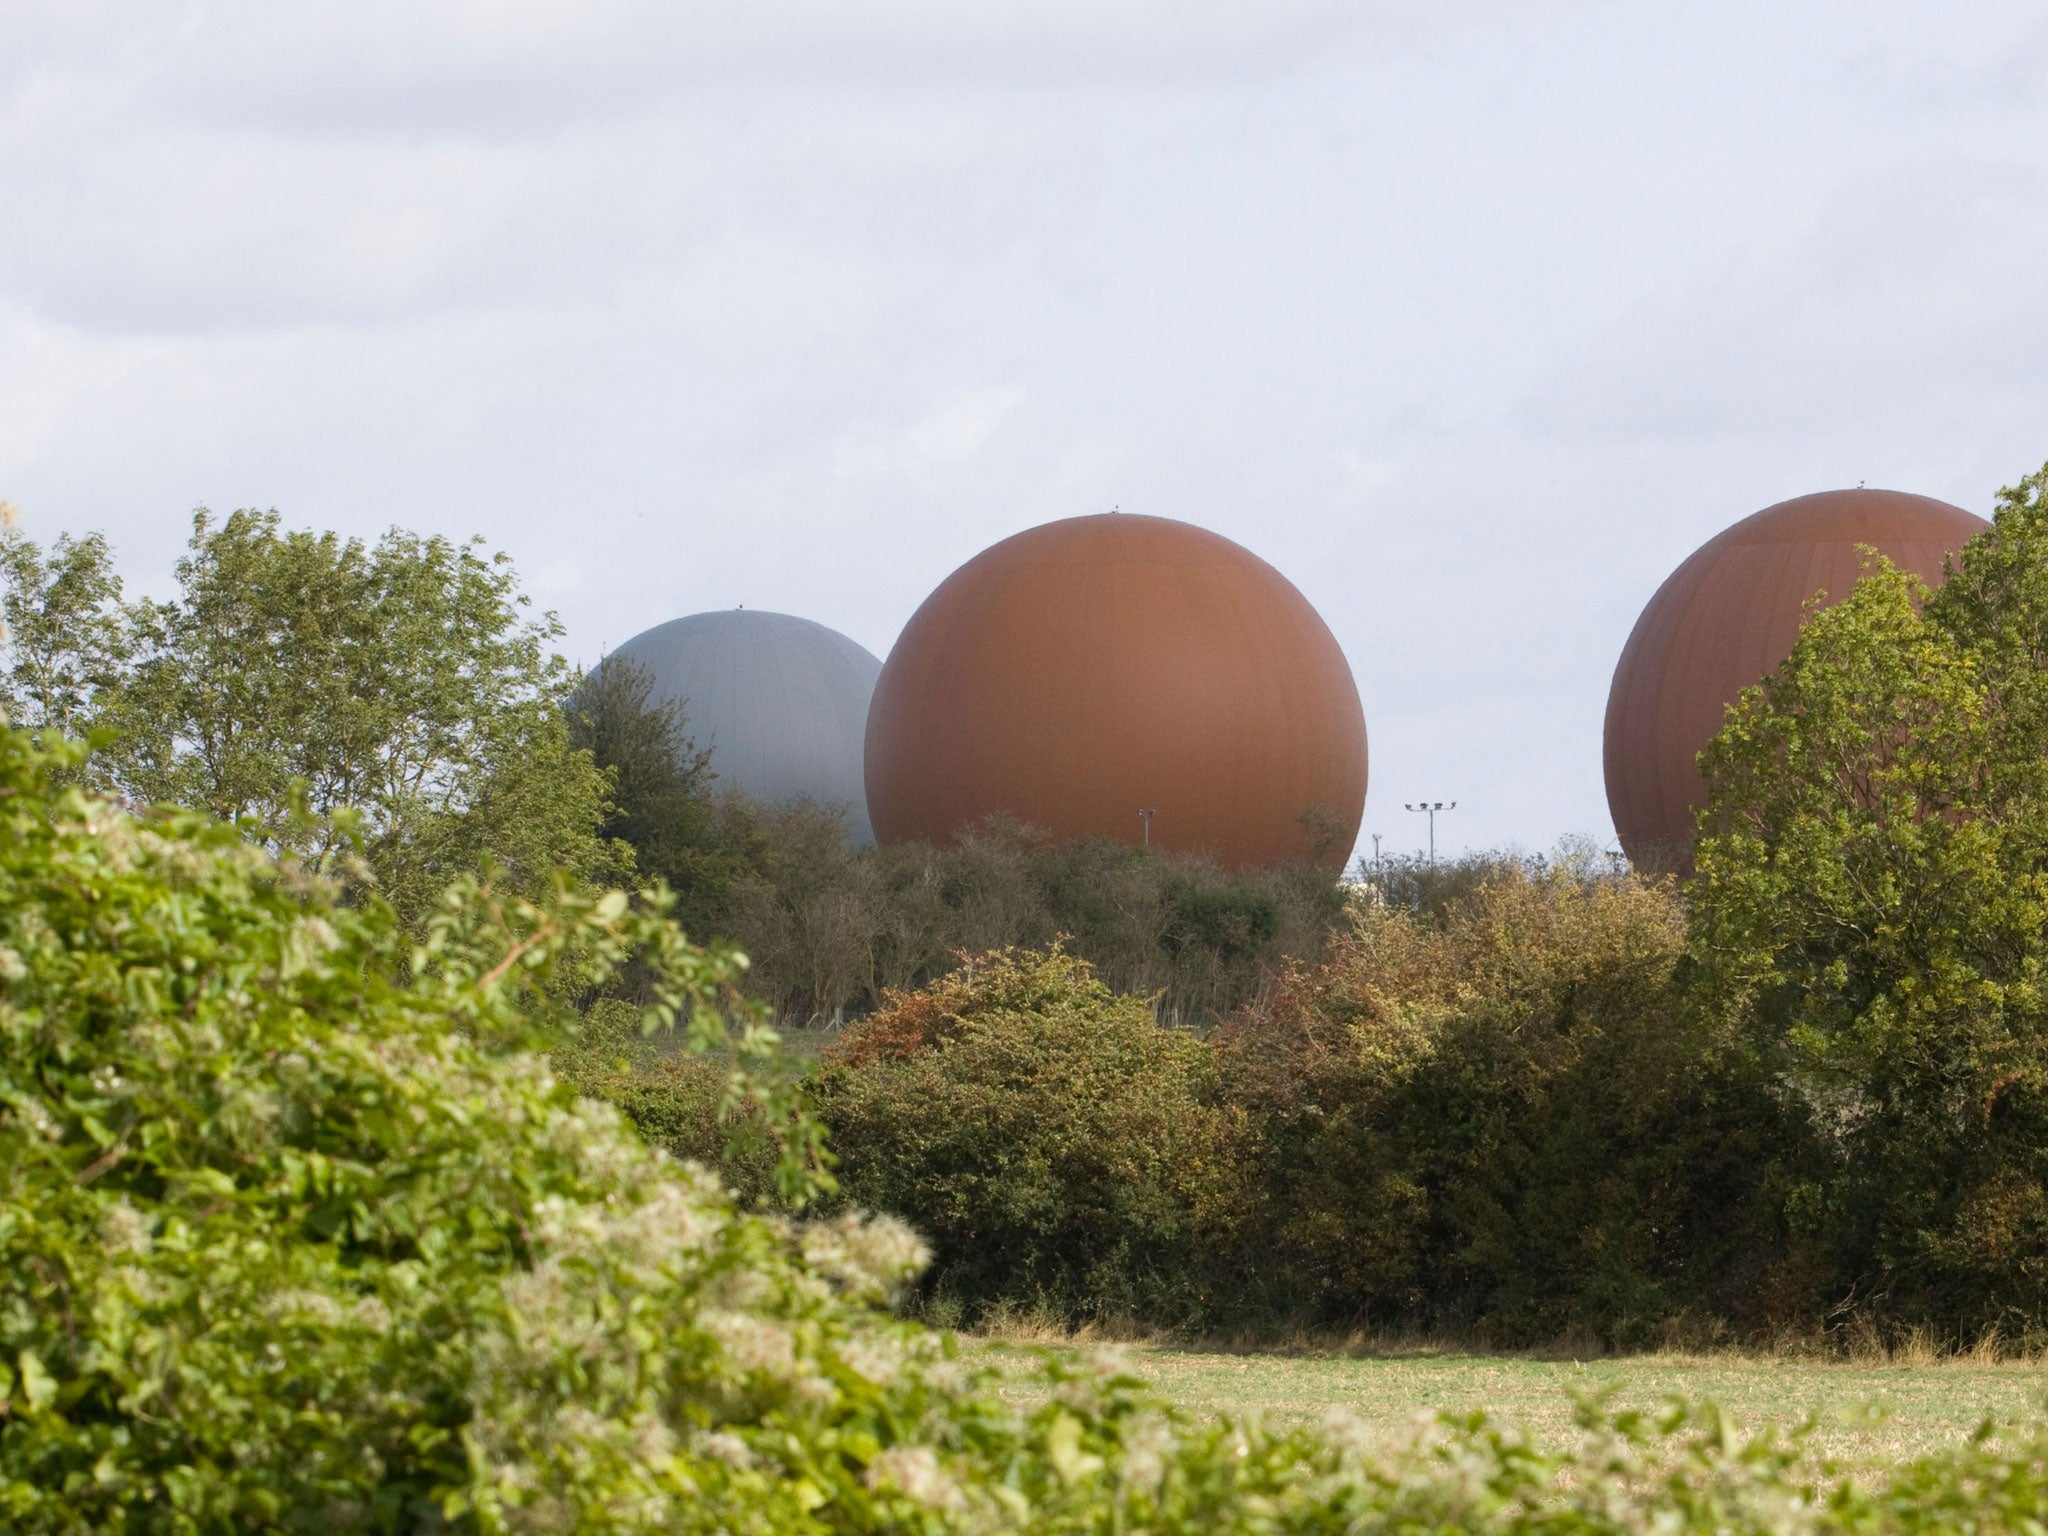 Radar domes at RAF Croughton, in Northamptonshire, which serves as a relay centre for CIA agent communications 